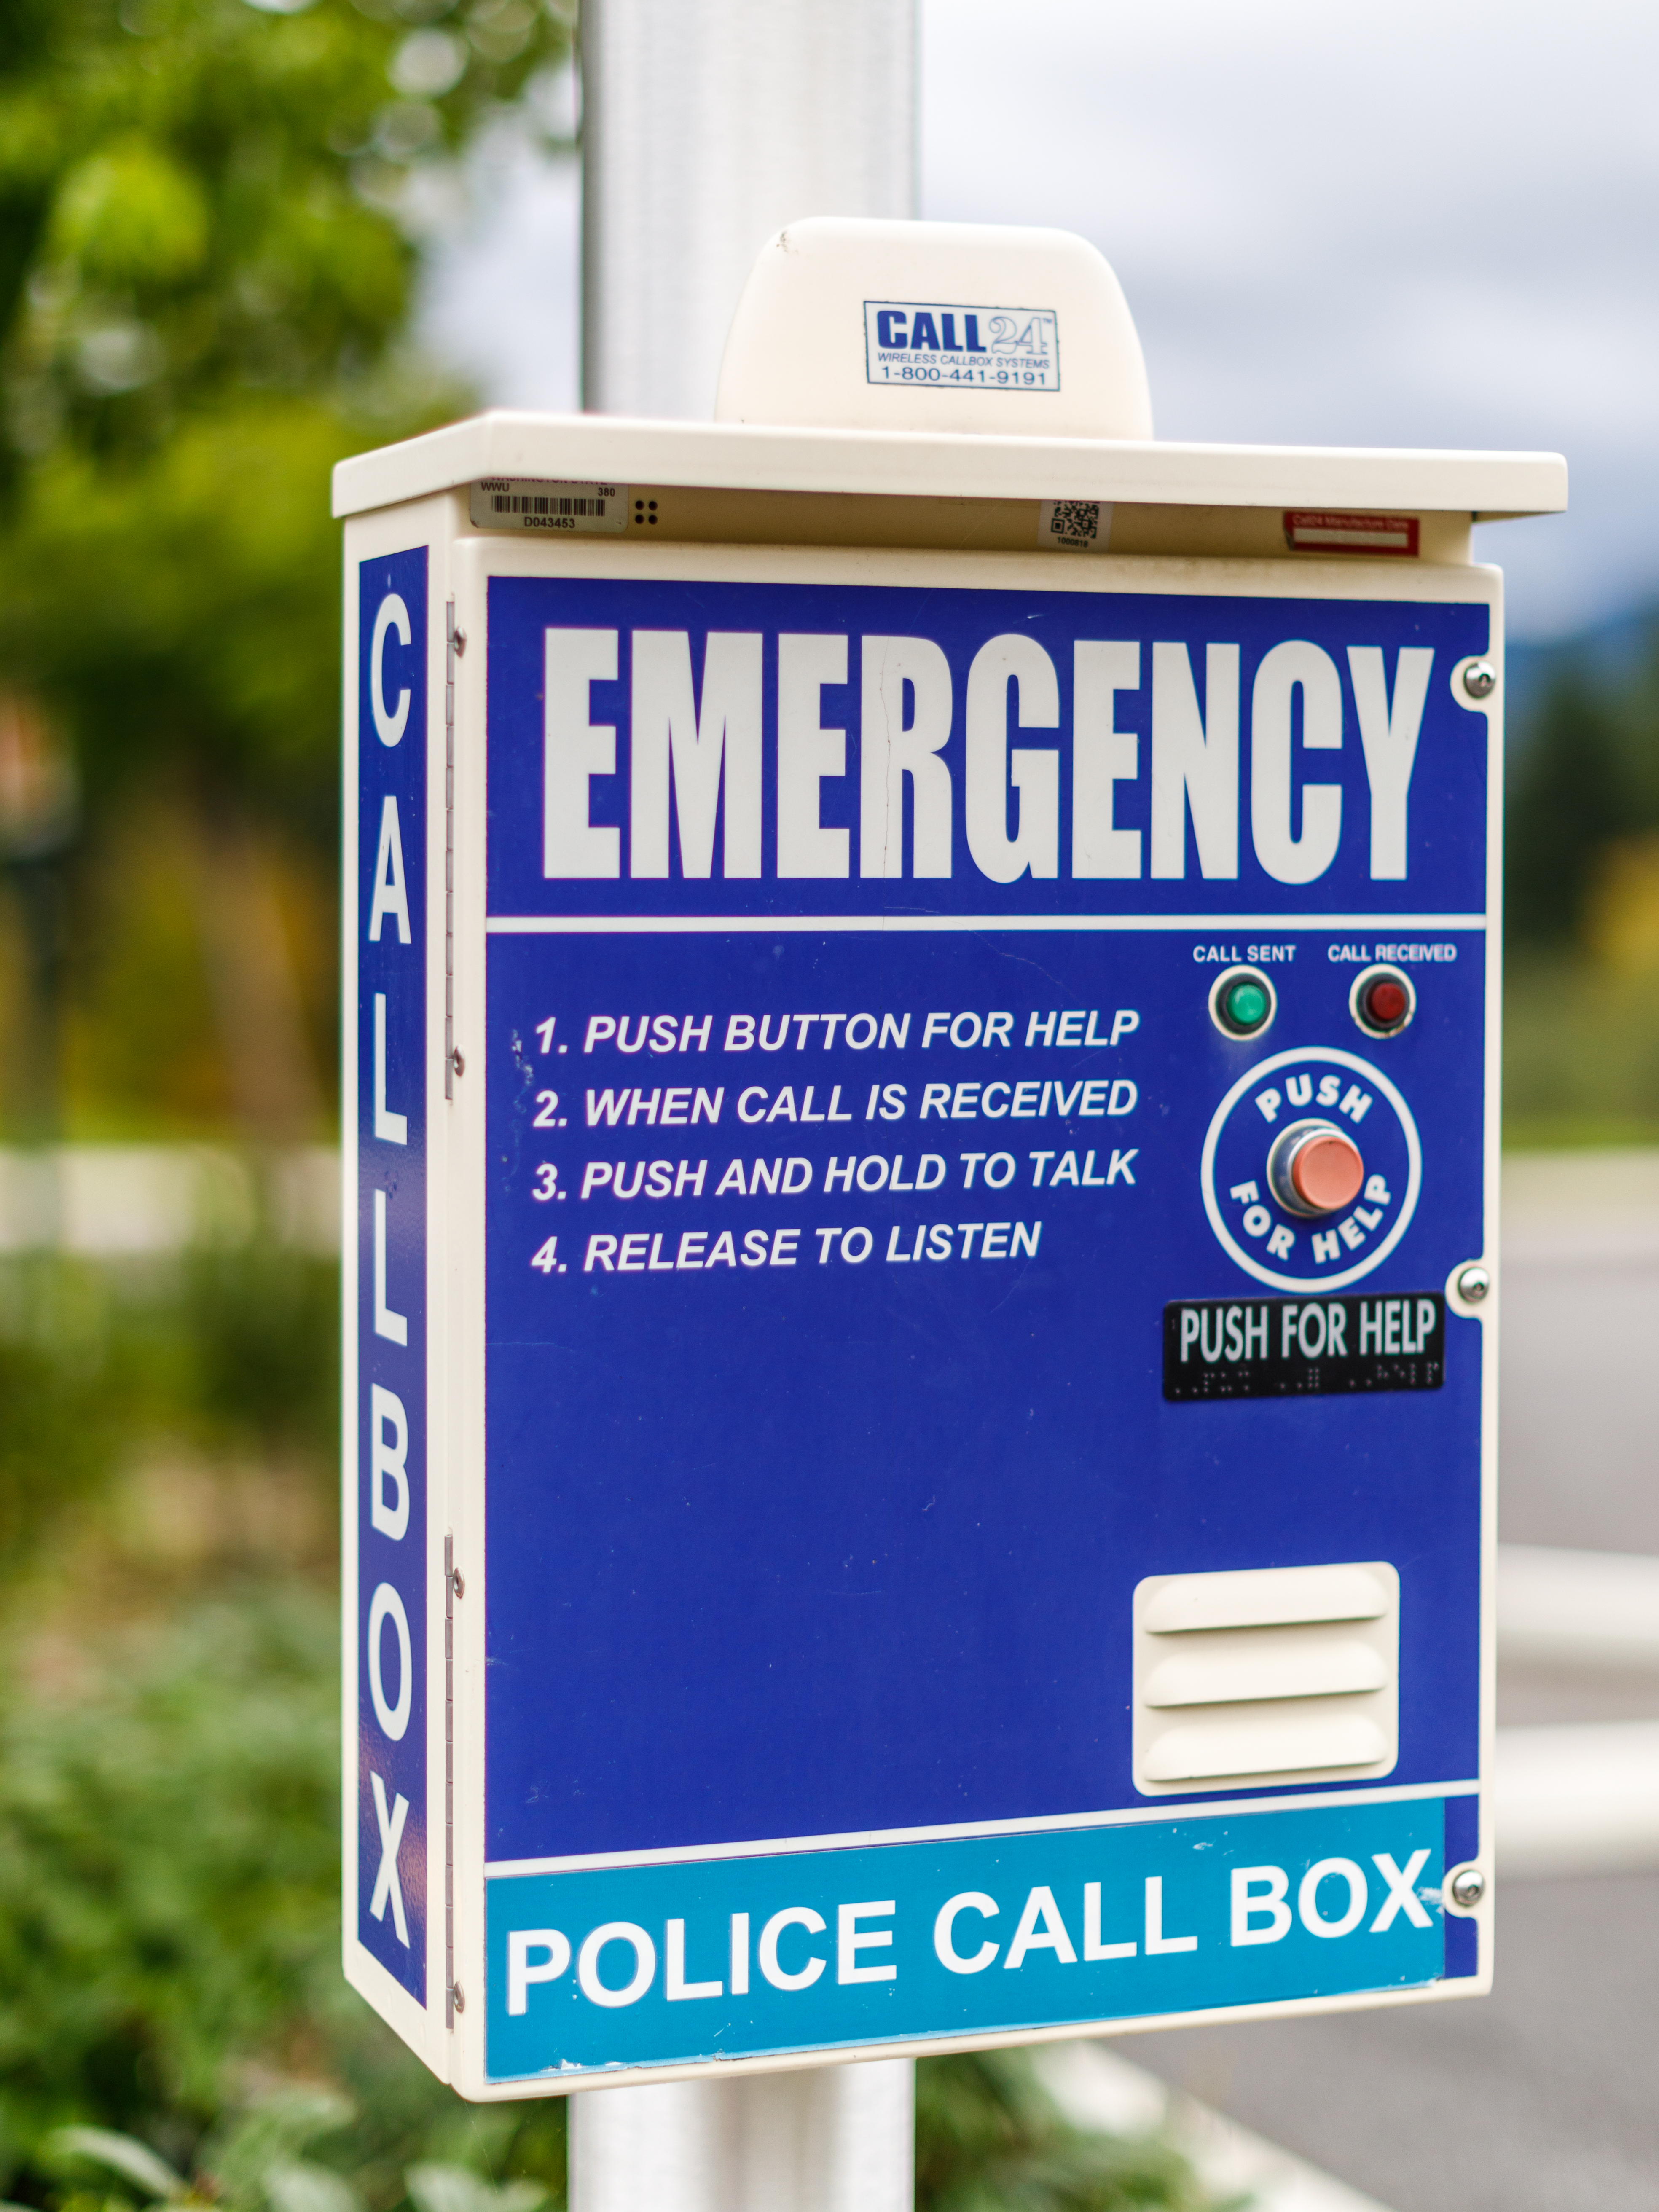 Photograph of Western’s blue 24 hour emergency police call box. Box reads in large letters, emergency, call box and police call box. Instructions for its use say “1. Push button for help 2. When call is received 3. Push and hold to talk 4. Release to listen” On the right side of the box there is a large red button, labeled with “Push for Help” with the braille underneath.